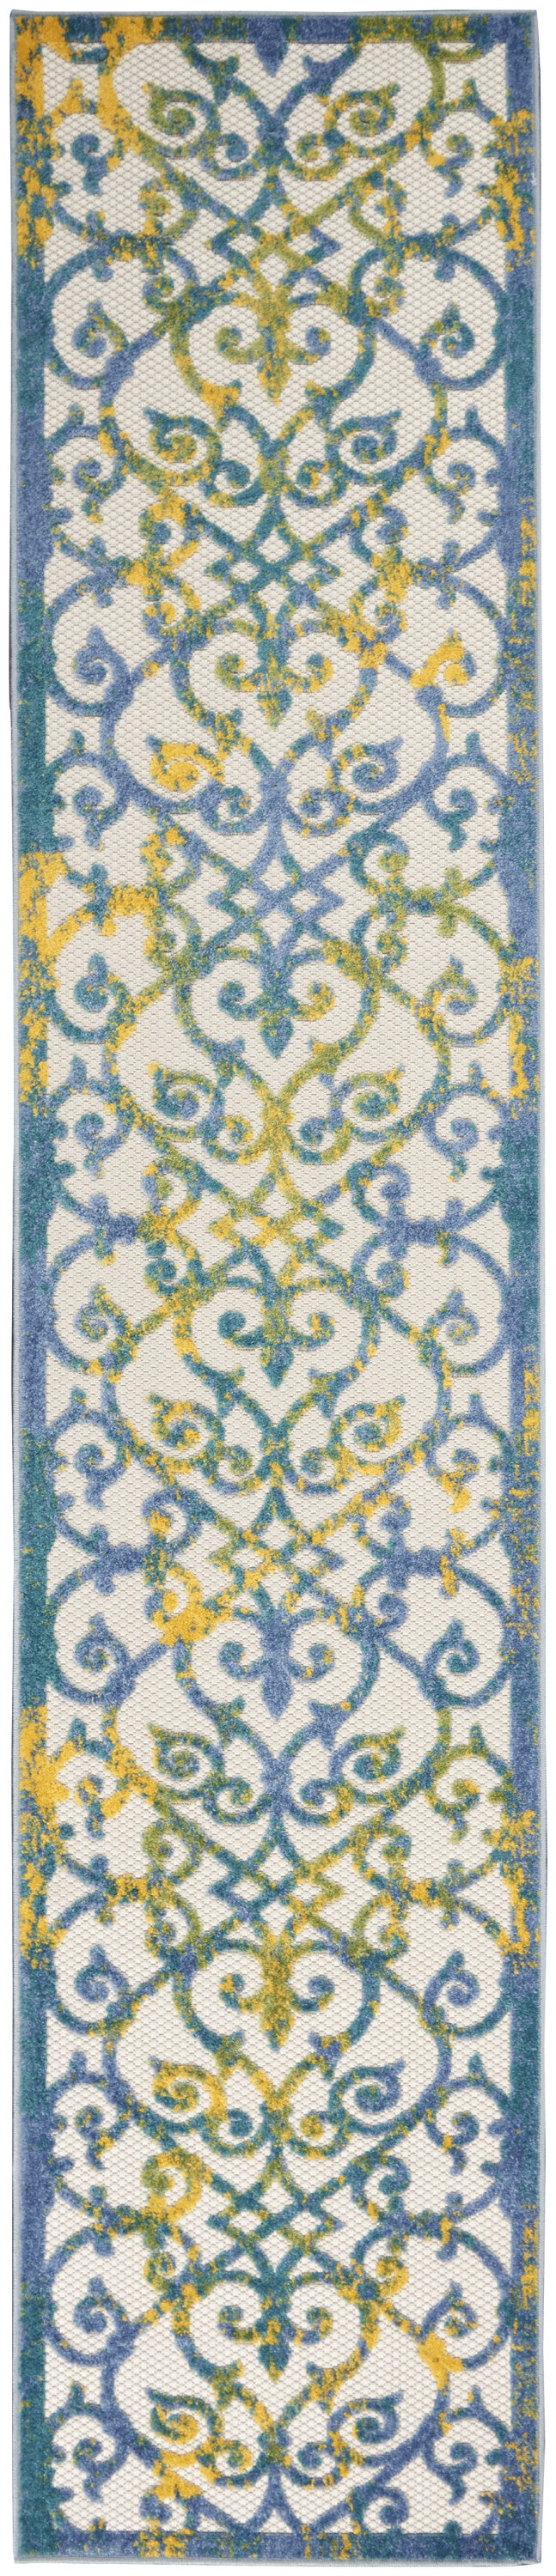 2' X 10' Ivory And Blue Damask Non Skid Indoor Outdoor Runner Rug